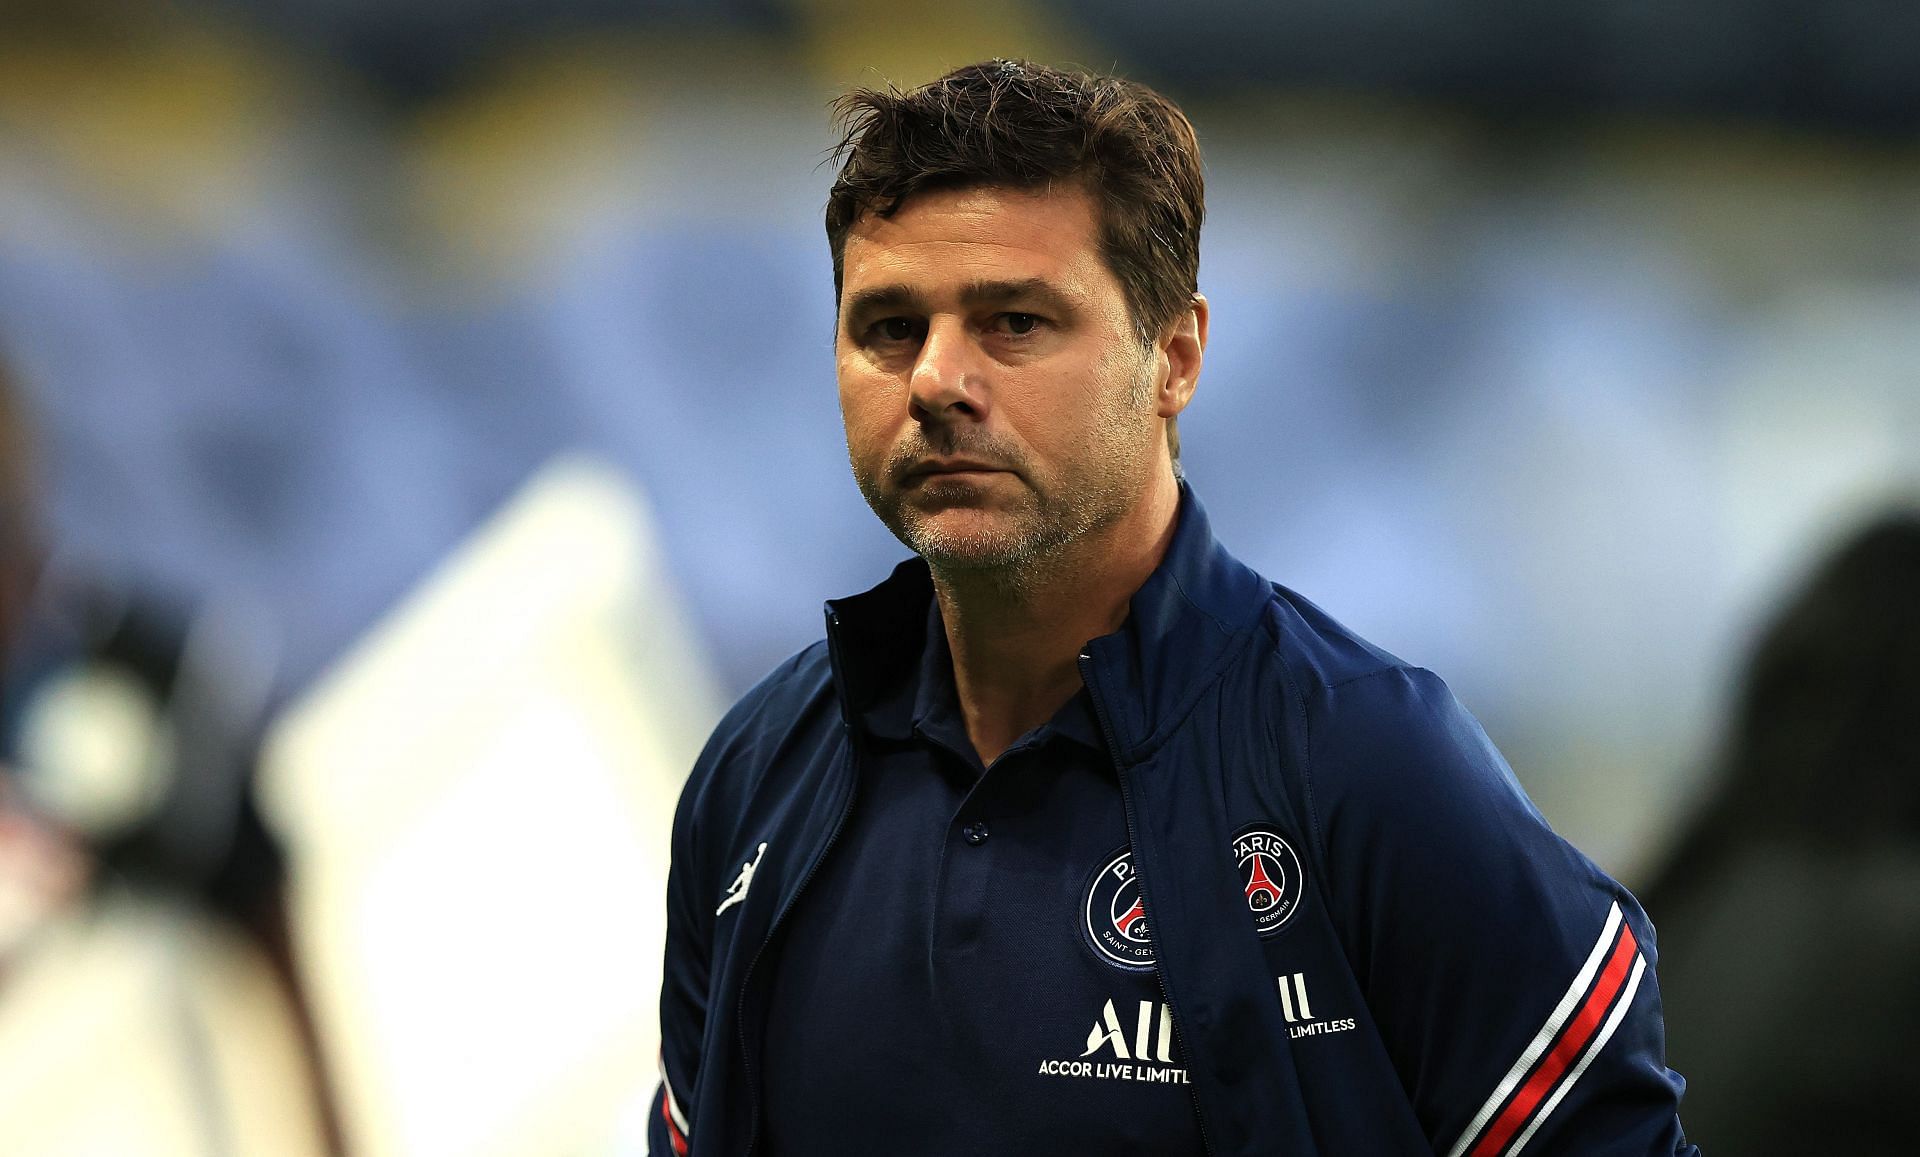 PSG manager Mauricio Pochettino has outlined the difference between Ligue 1 and the Premier League